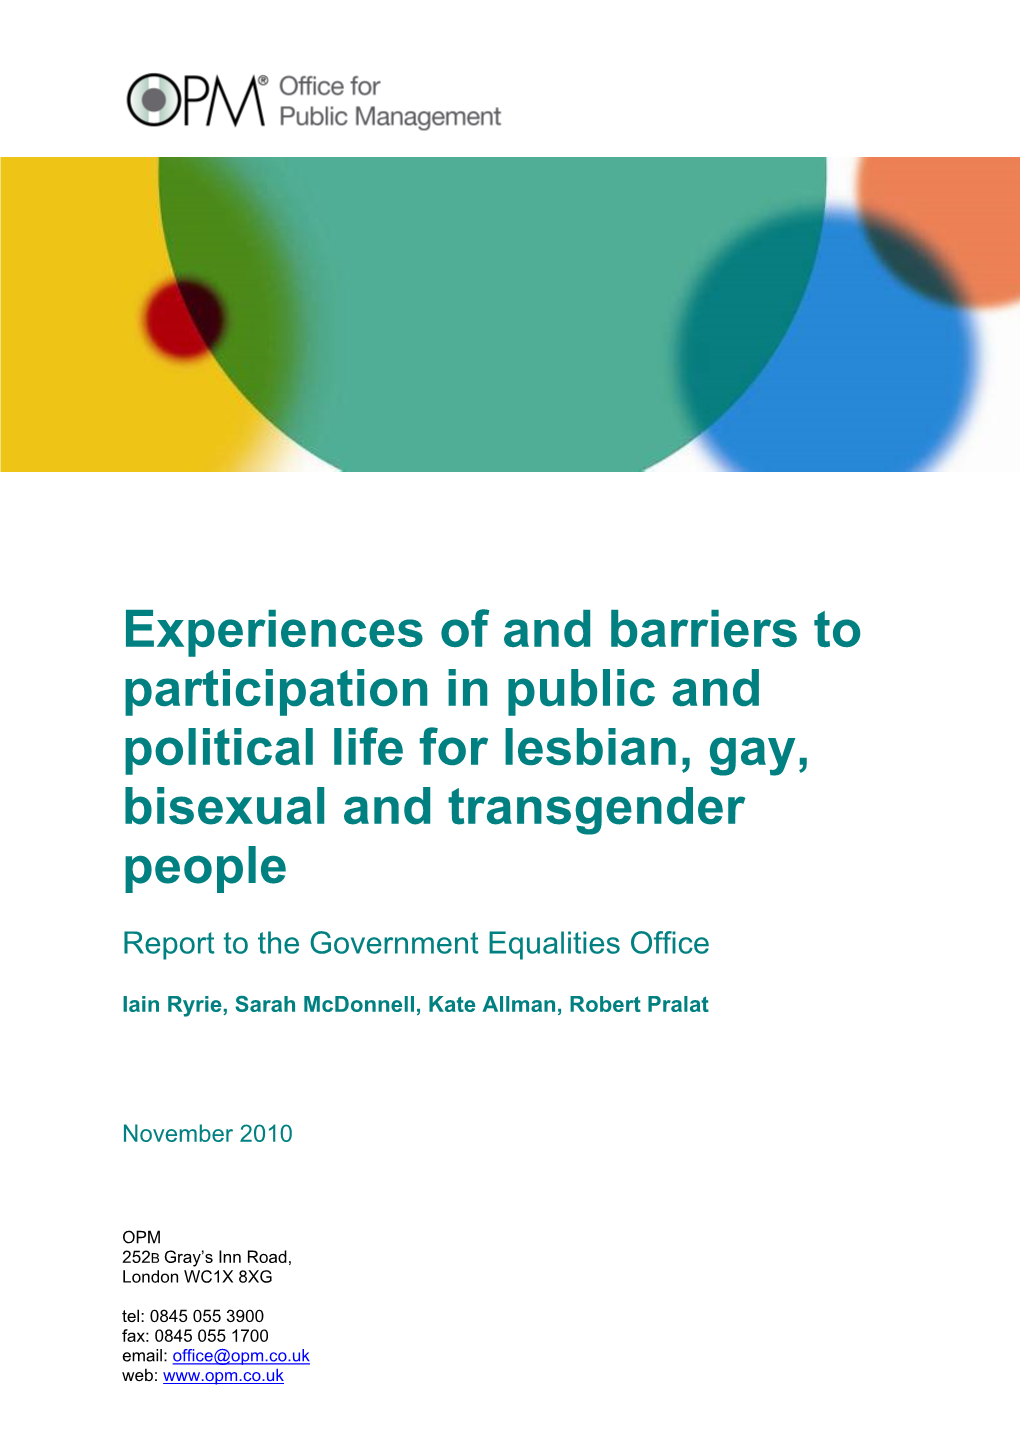 Experiences of and Barriers to Participation in Public and Political Life for Lesbian, Gay, Bisexual and Transgender People